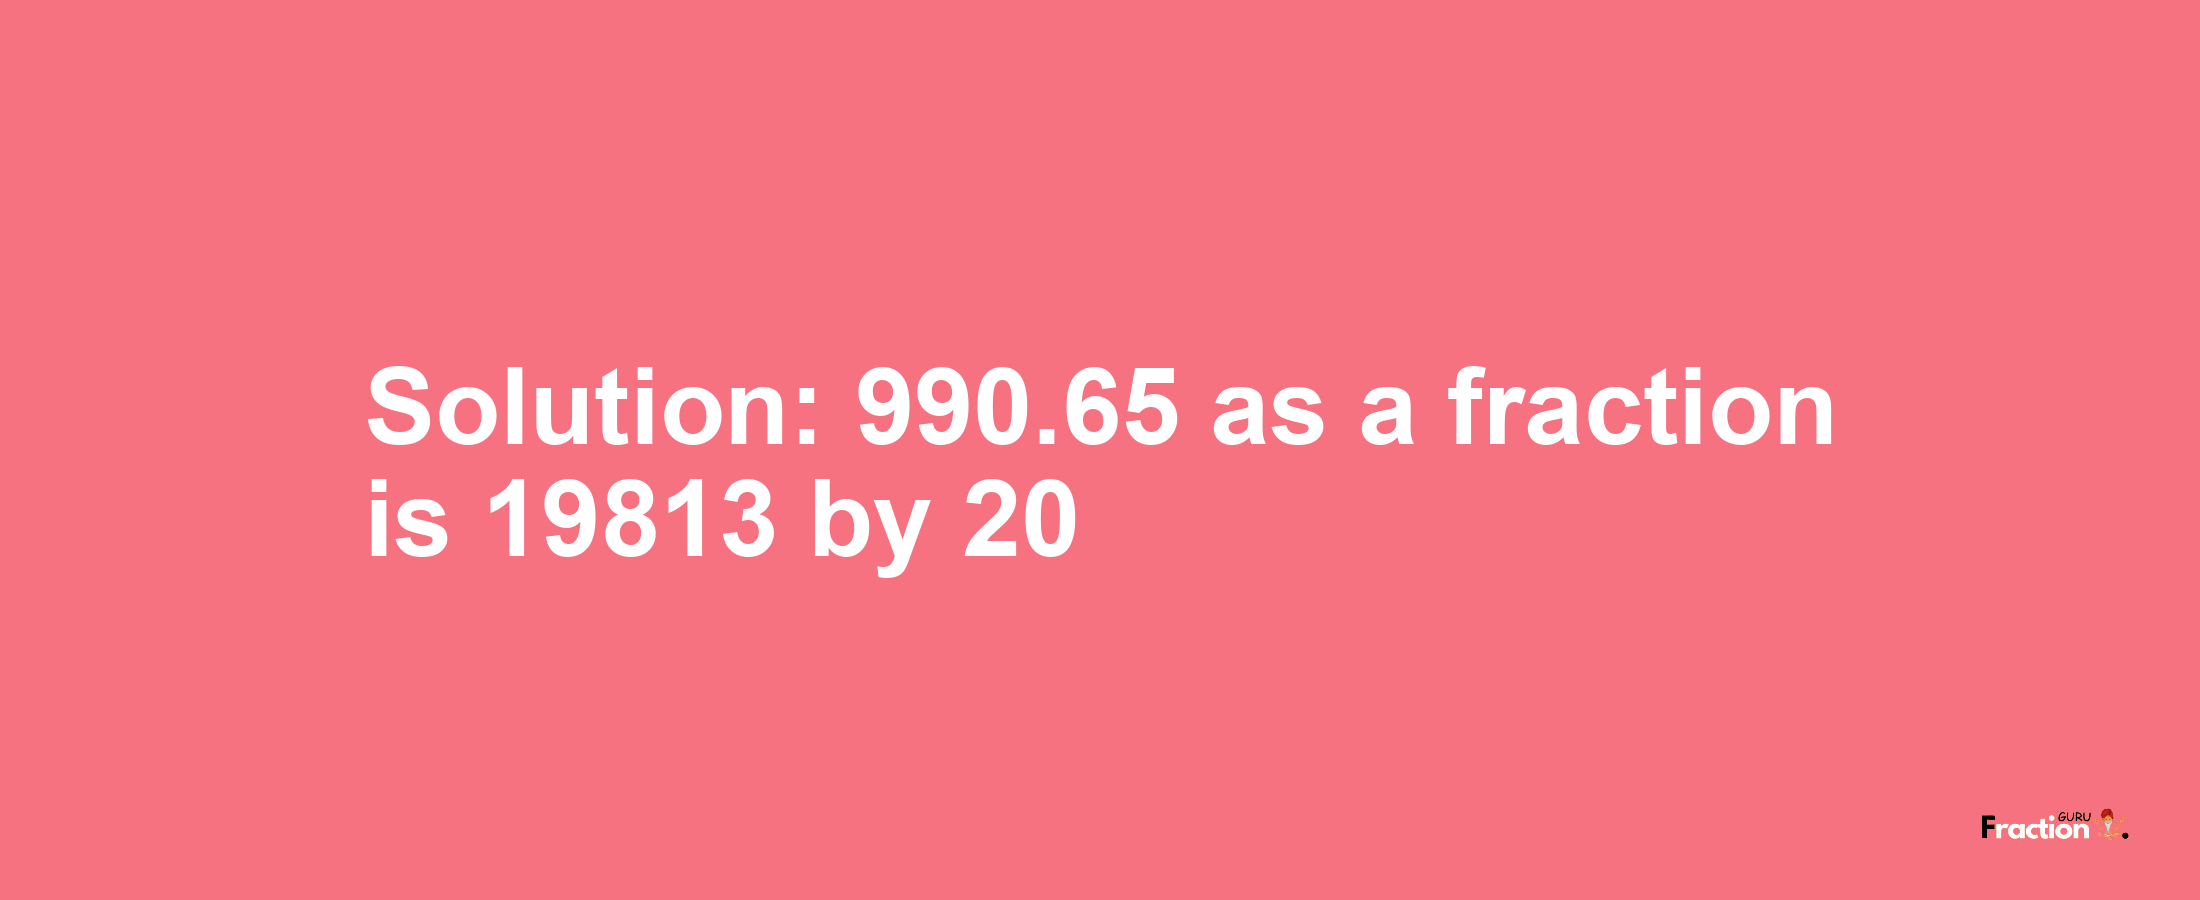 Solution:990.65 as a fraction is 19813/20